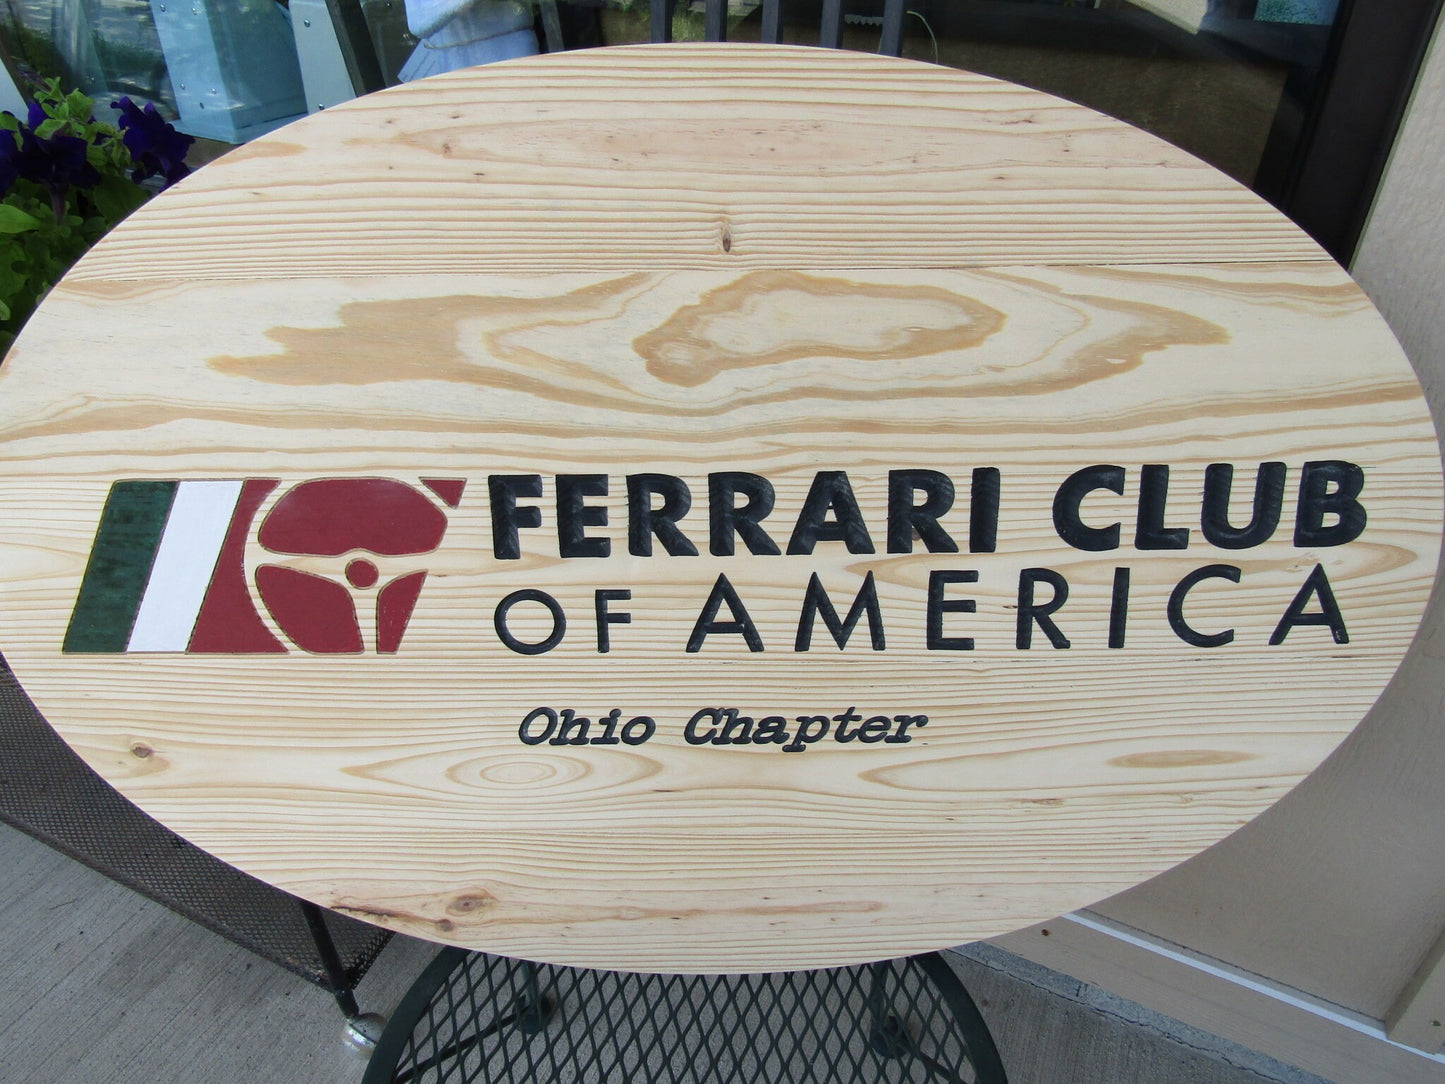 Automotive Car Club Vehicle Engraved Pine Color Filled Routed Sterring Wheel Logo Oval Large Handmade CNC Indoor Outdoor Commerical Signage